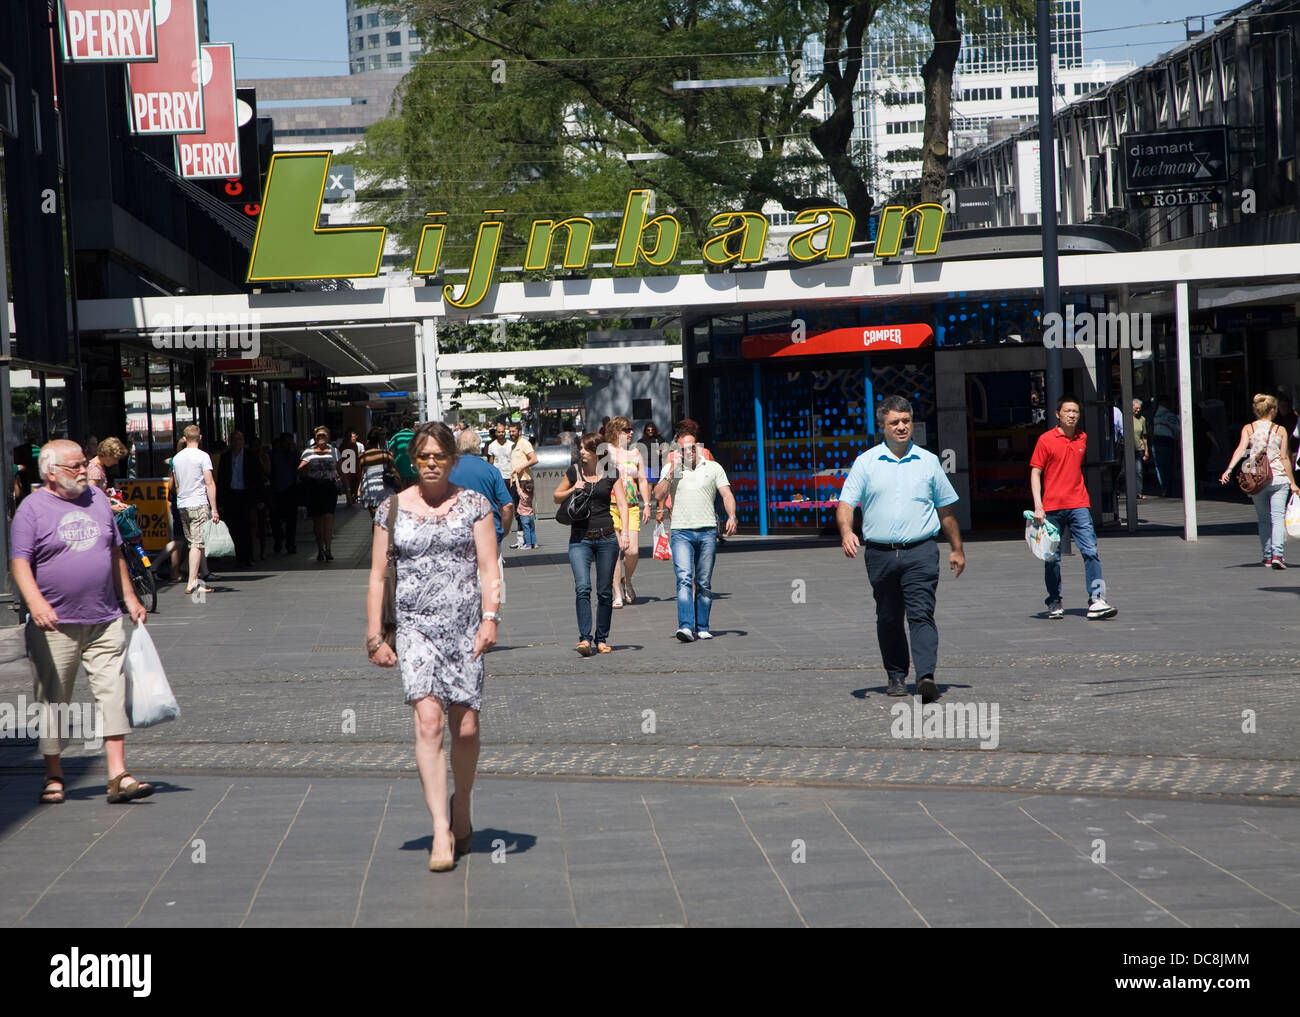 Lijnbaan pedestrianised shopping in central Rotterdam Netherlands opened in 1953 Europe's first car-free shopping street Stock Photo